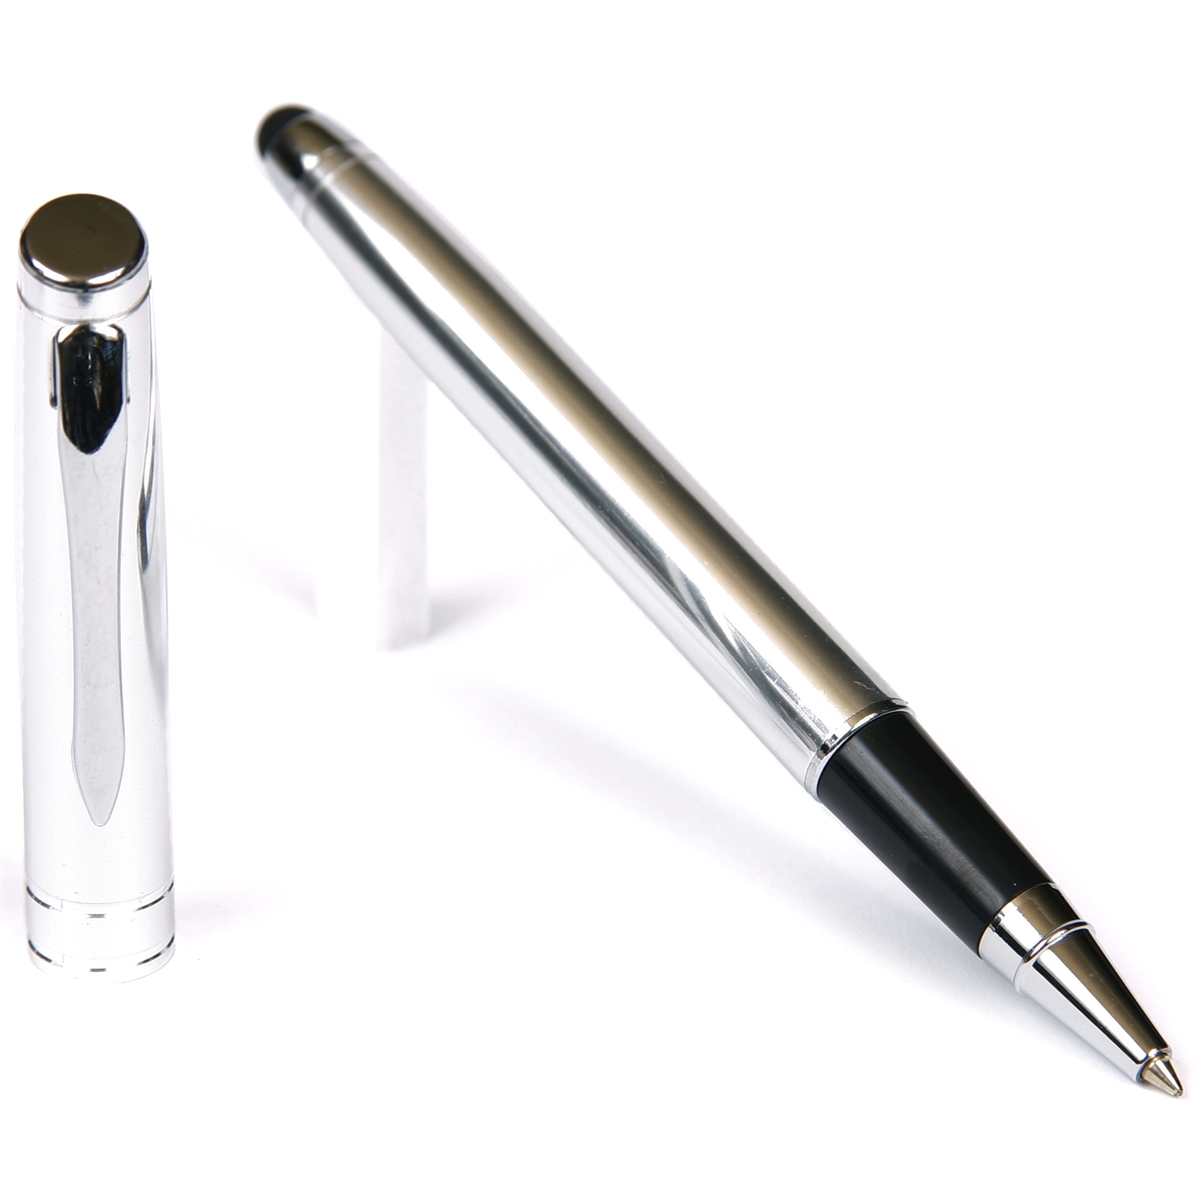 D210 - Chrome Rollerball Pen with Stylus